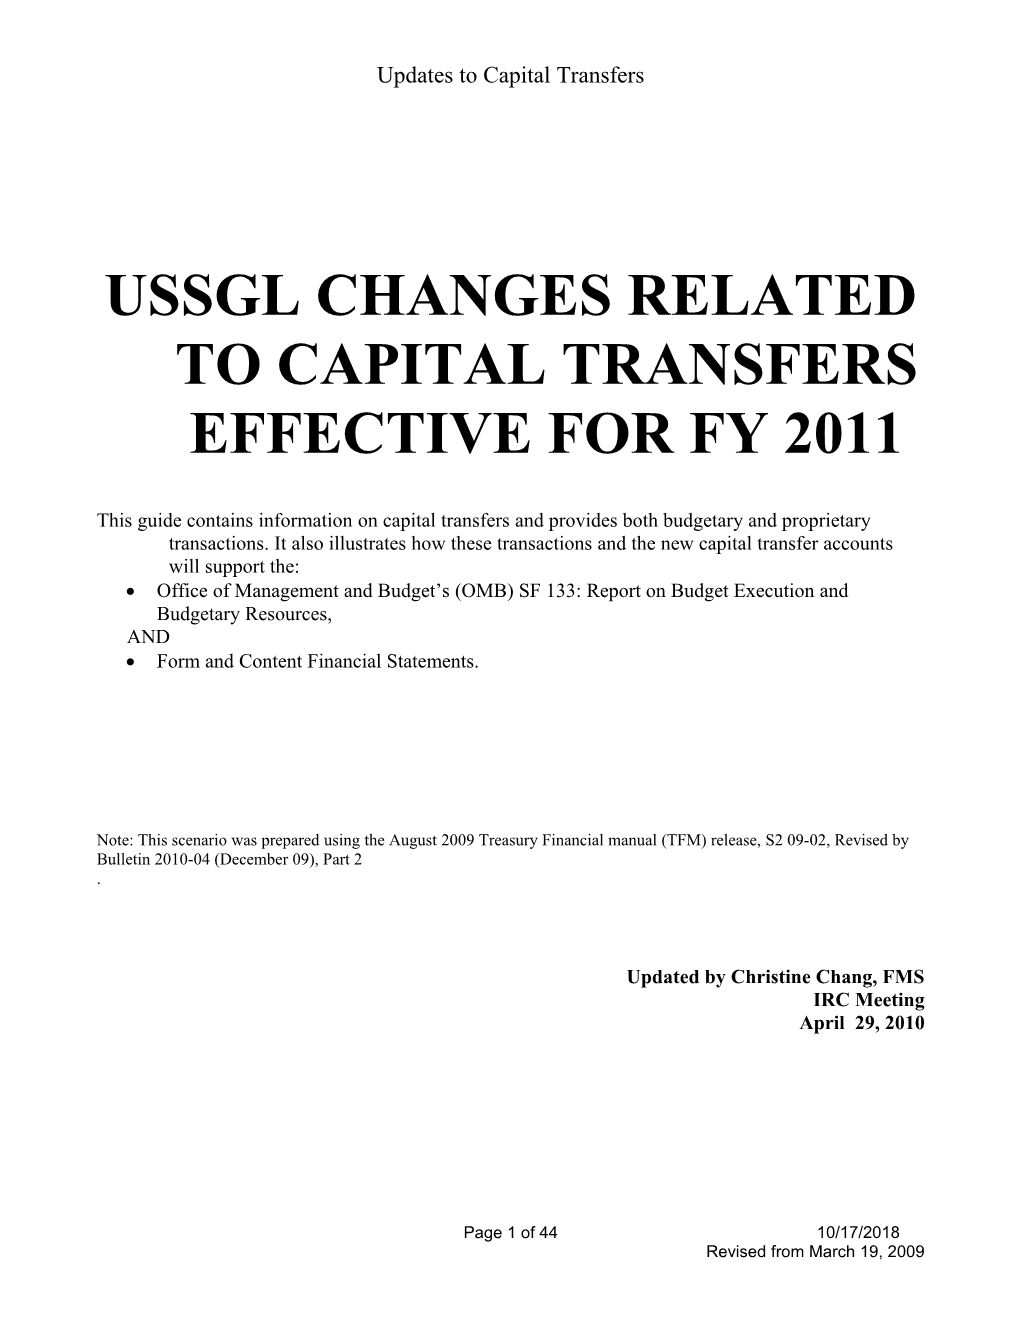 Ussgl Changes Related to Capital Transfers Effective for Fy 2011